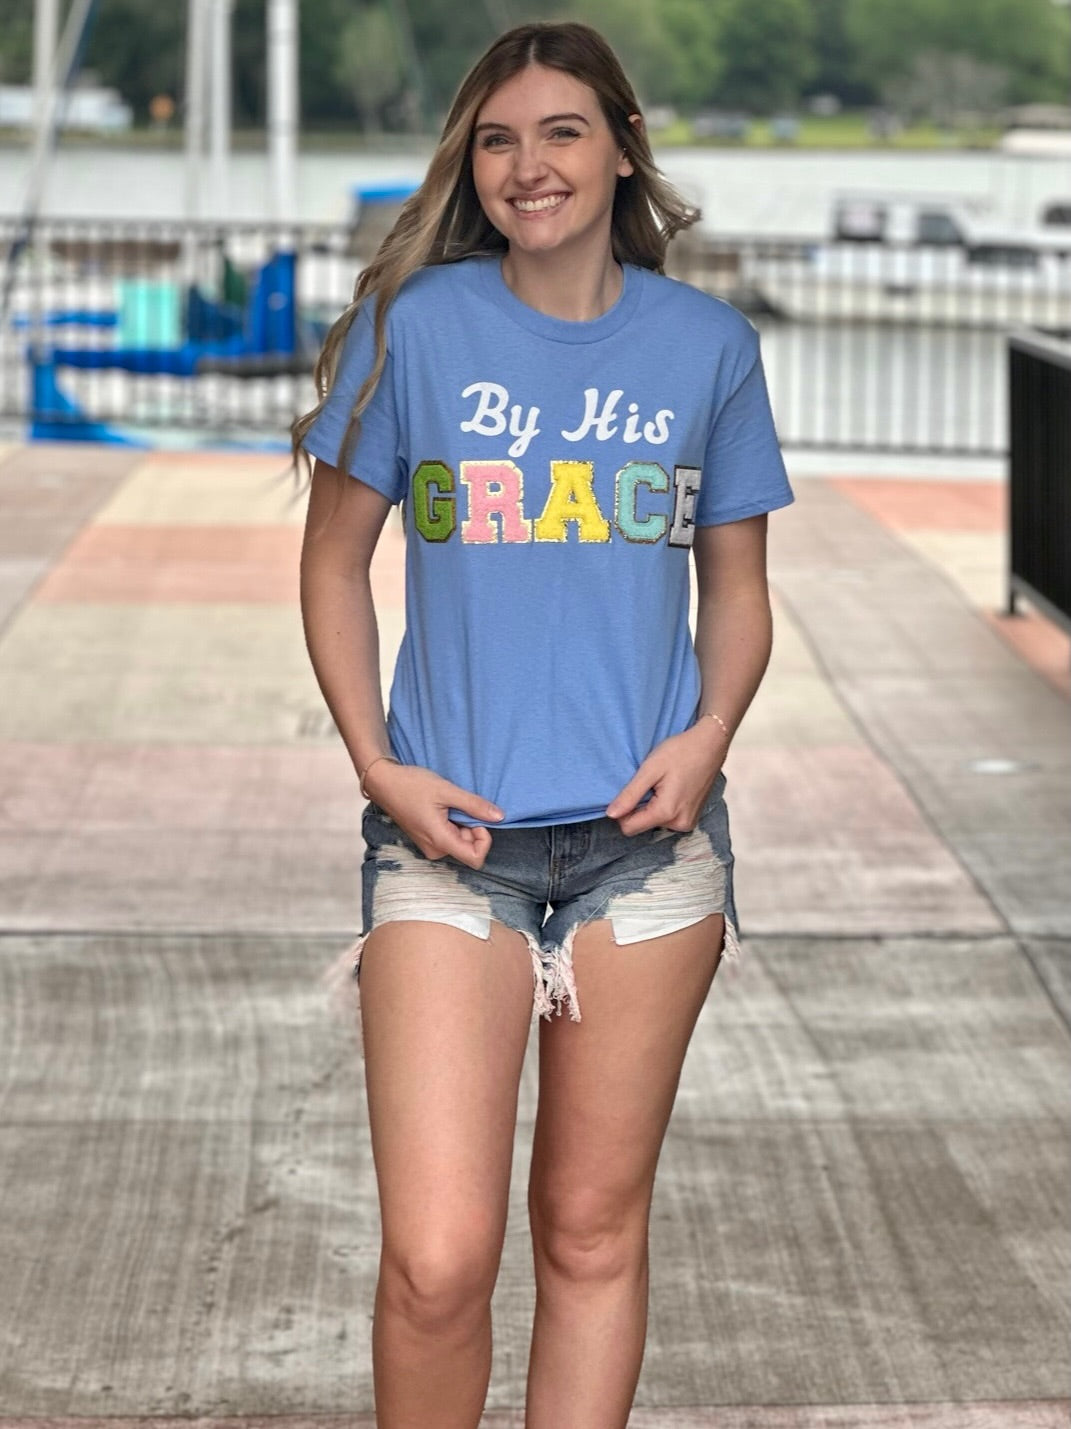 Lexi in carolina blue tee front view holding shirt